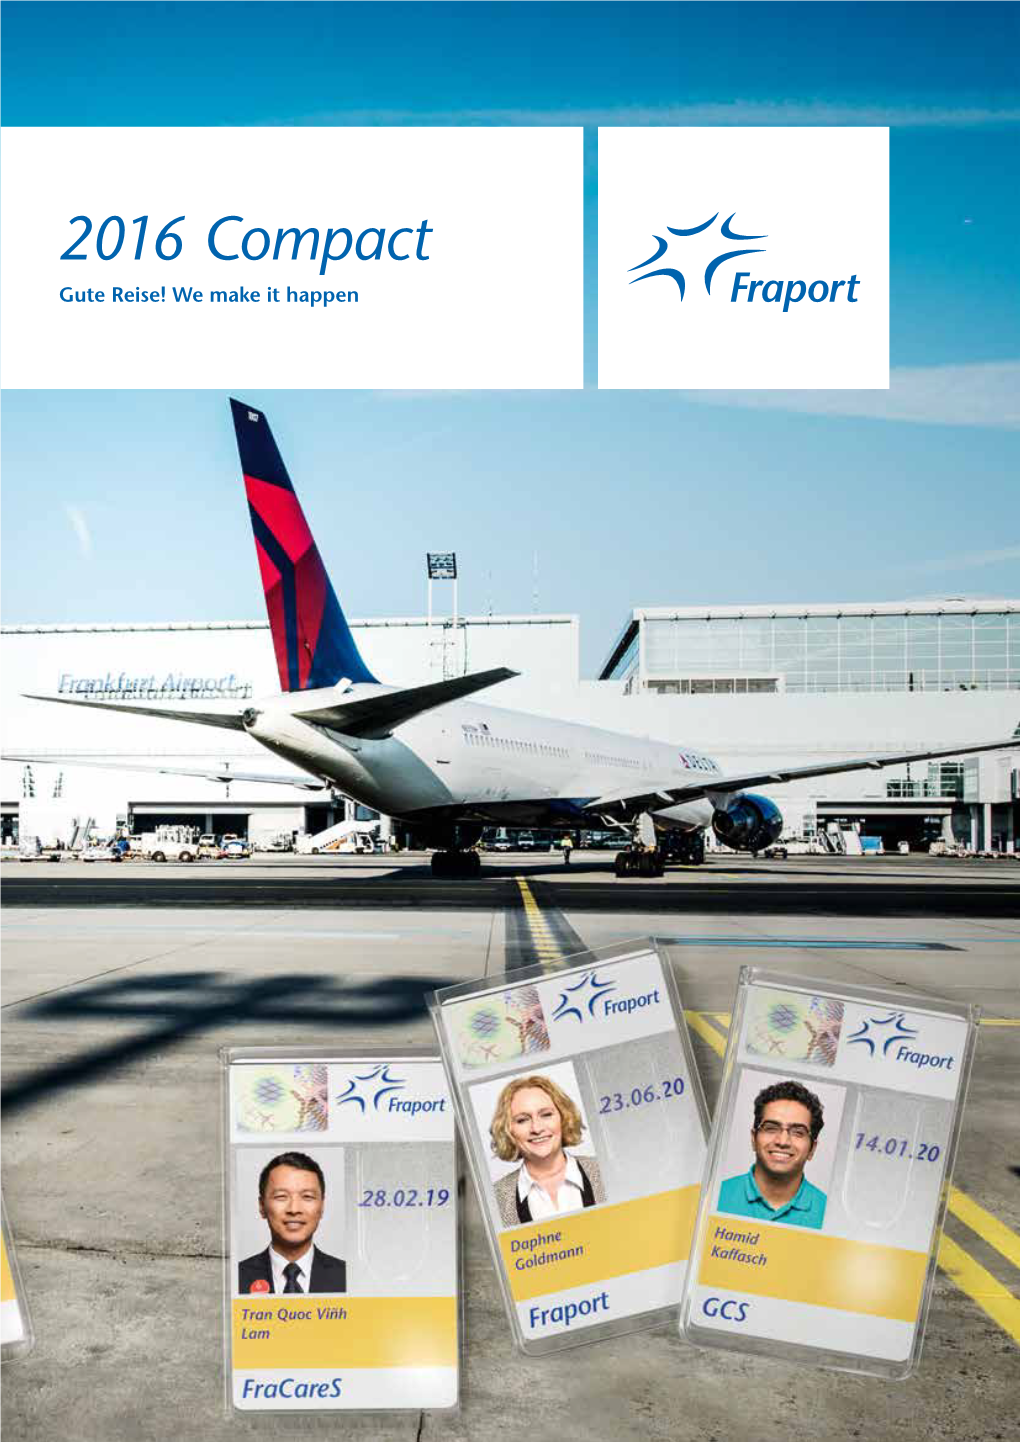 2016 Compact Gute Reise! We Make It Happen 2016 Compact